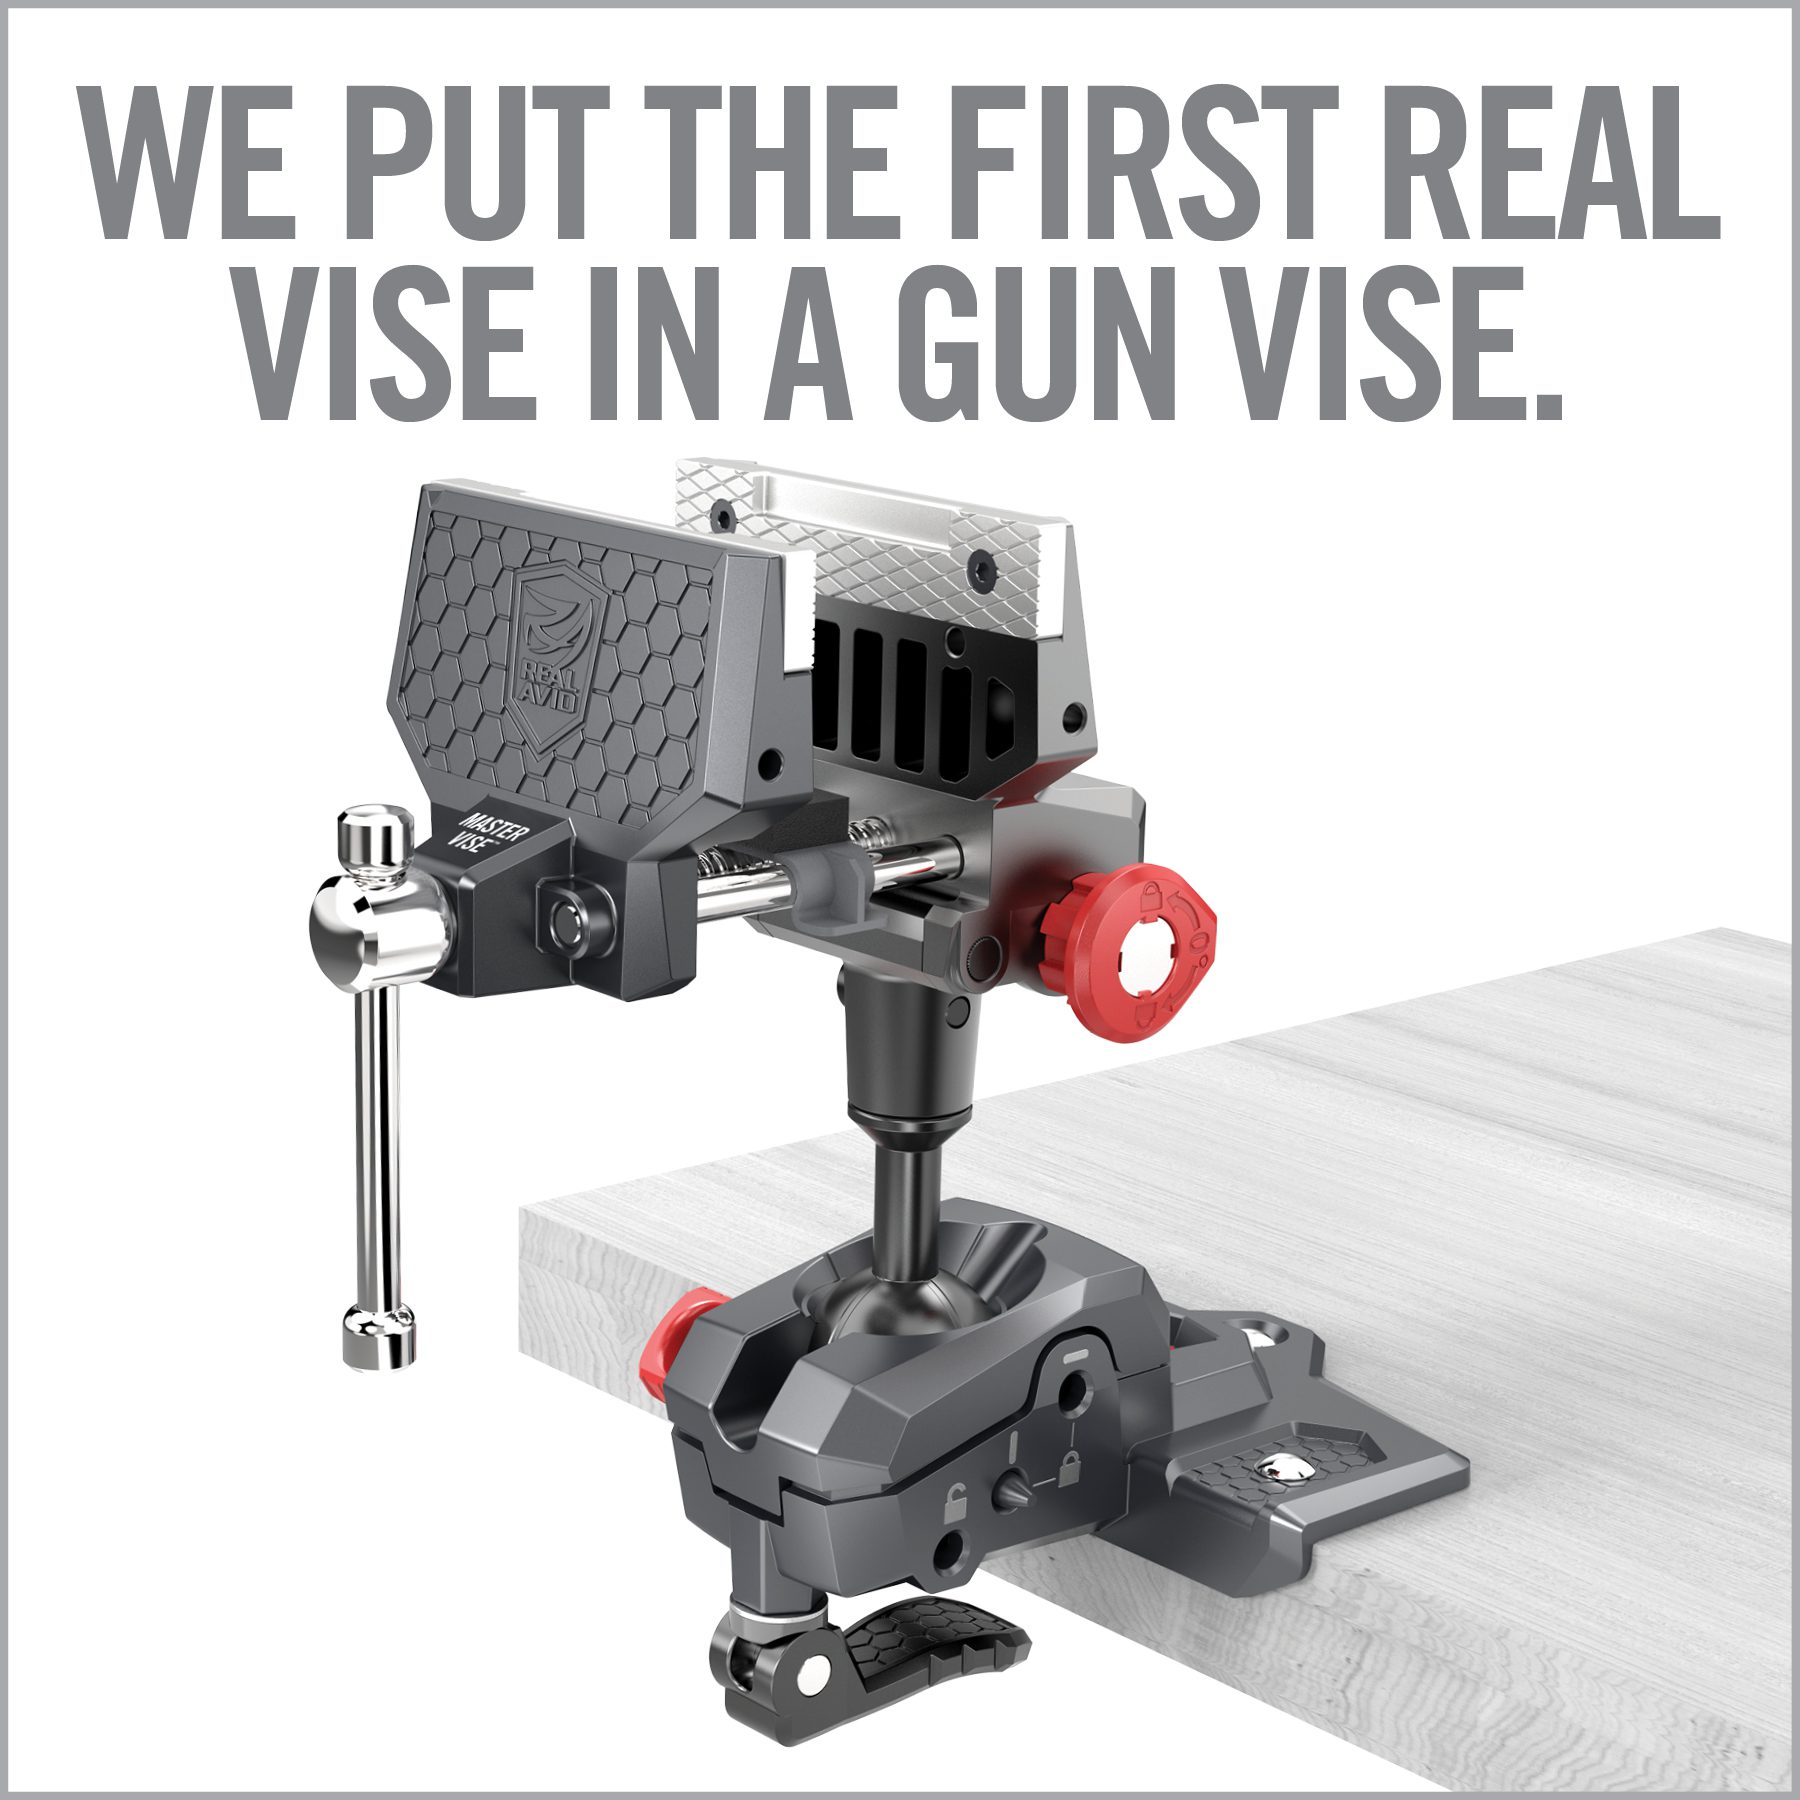 the gun vise is attached to a wooden table